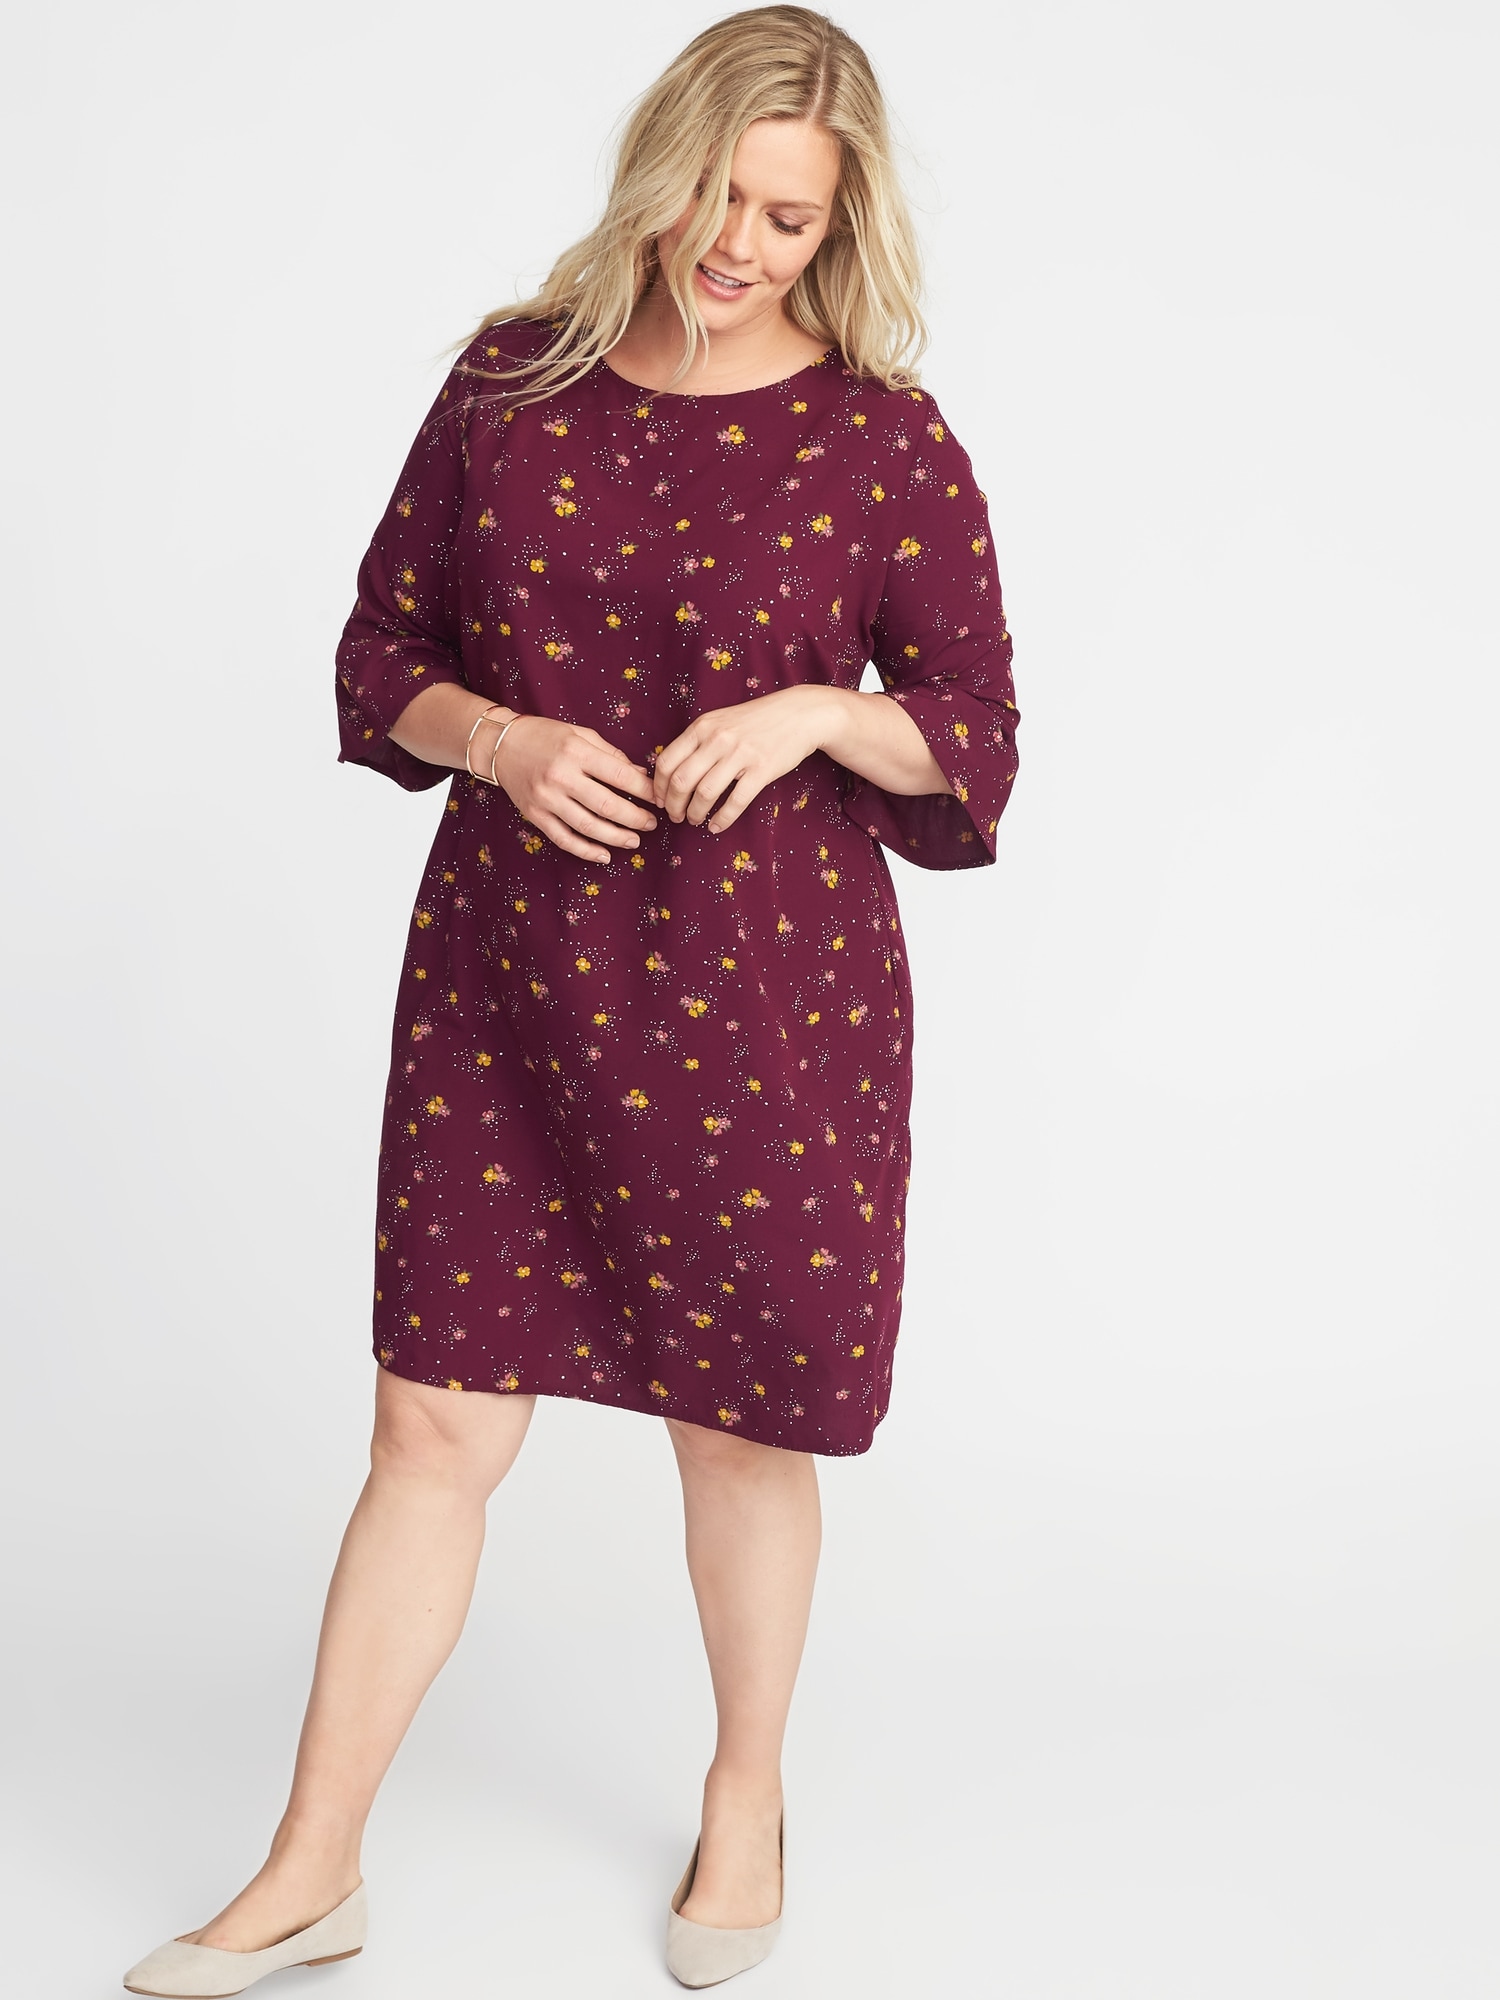 Floral-Print 3/4-Sleeve Plus-Size Shift Dress | Old Navy